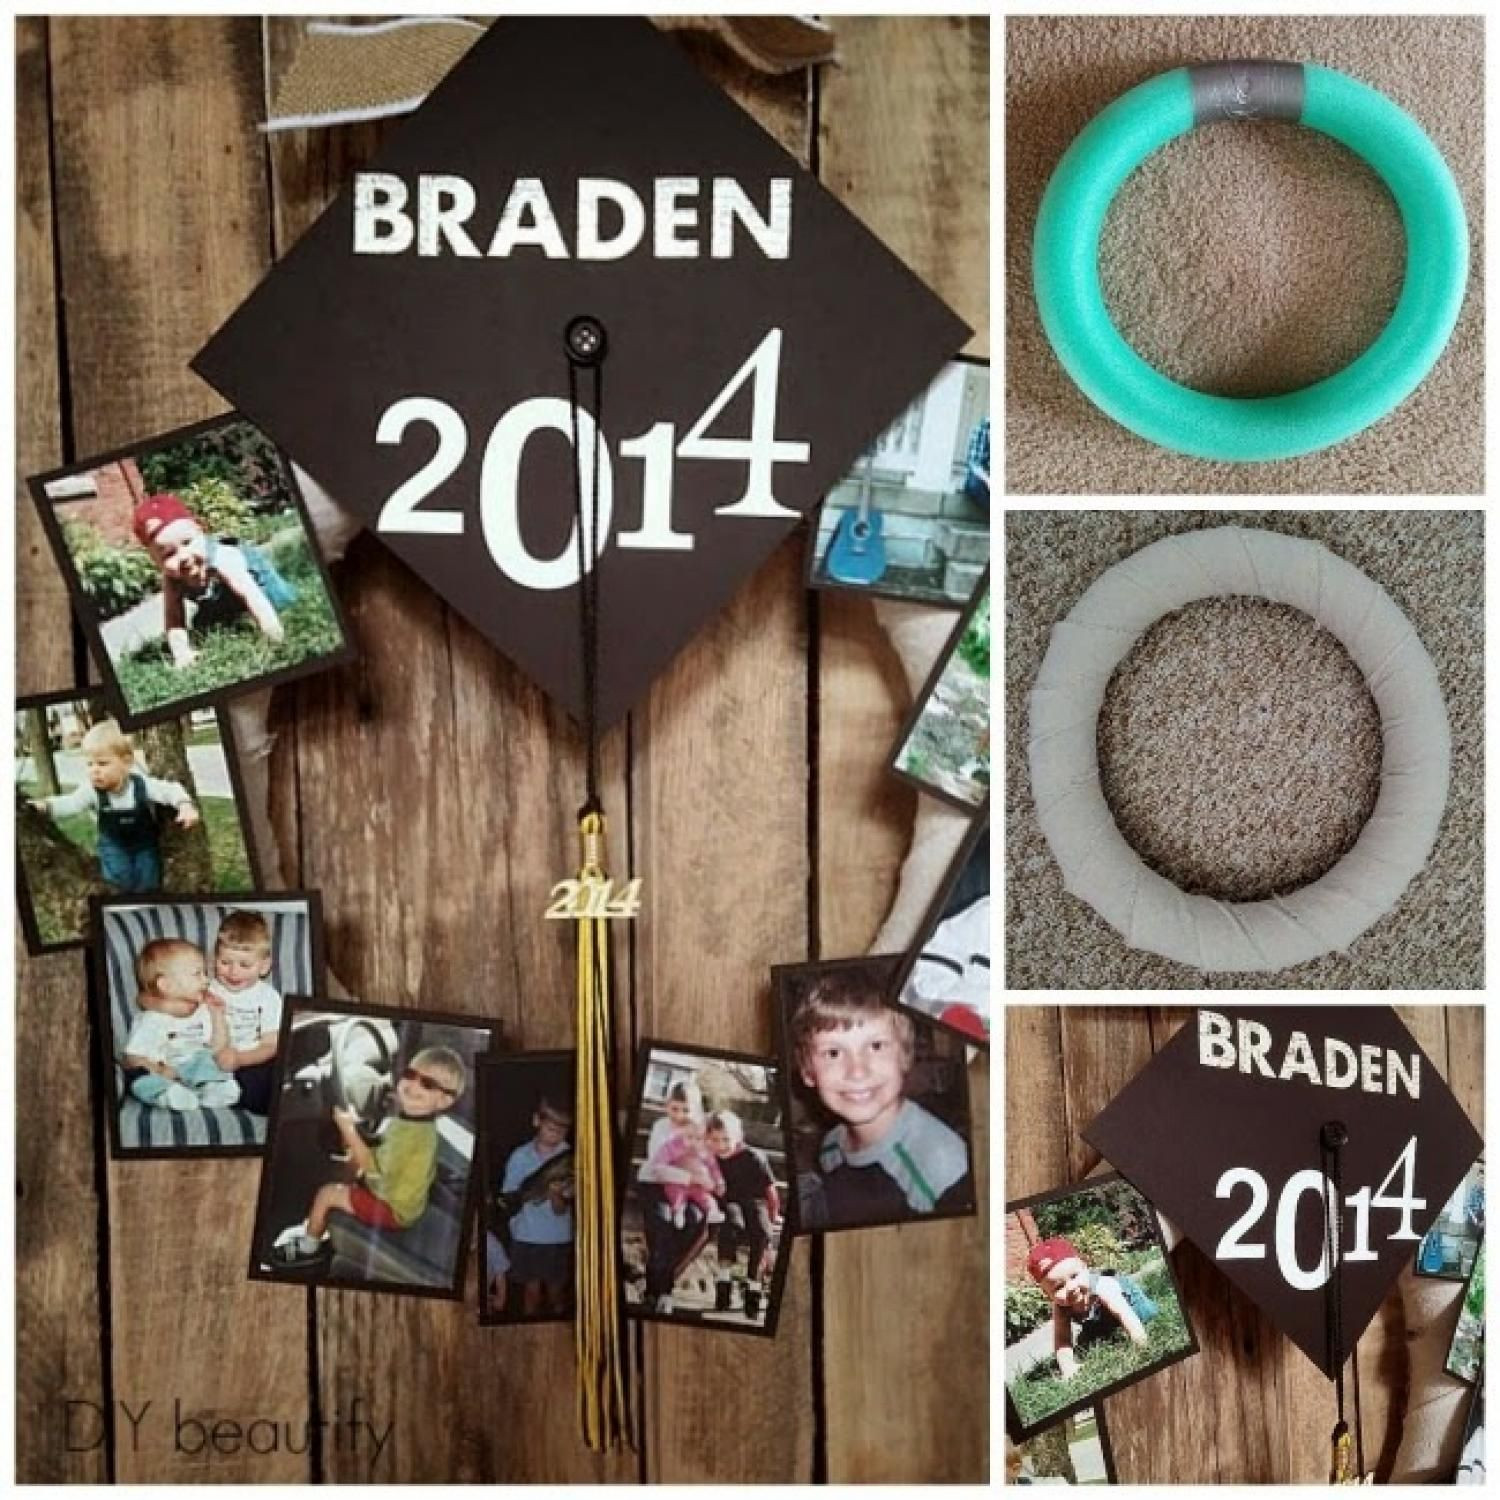 Graduation Party Picture Collage Ideas
 15 Graduation Party Ideas—From Preschool to High School